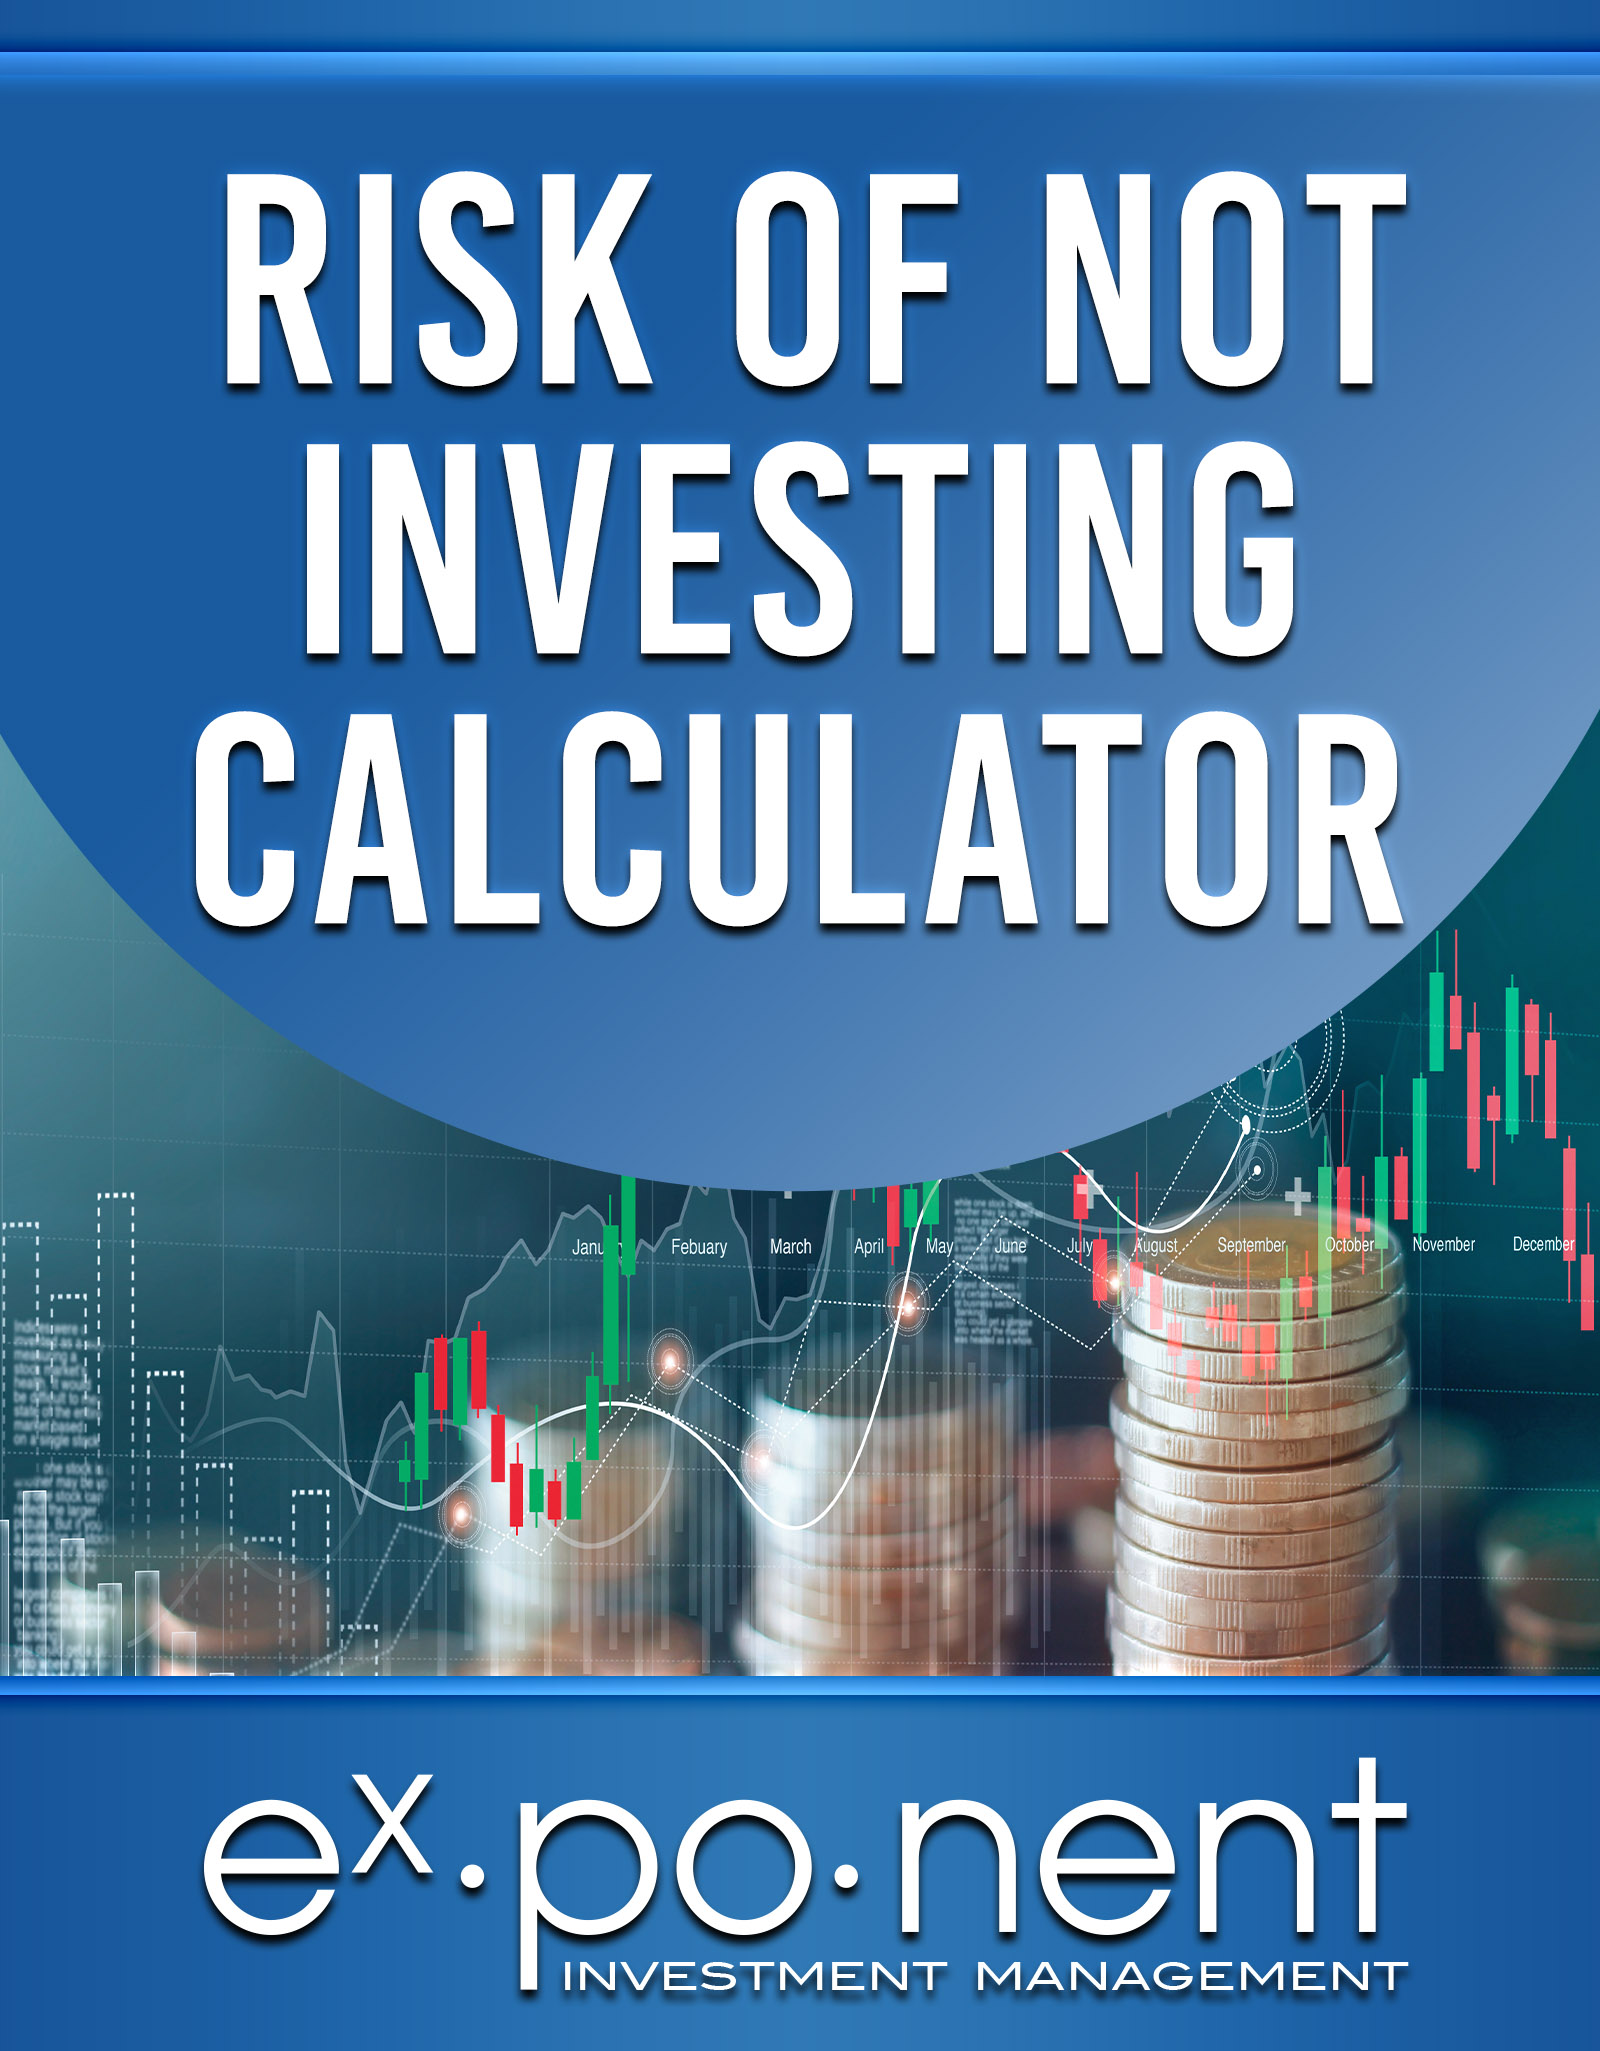 risk of not investing calculator